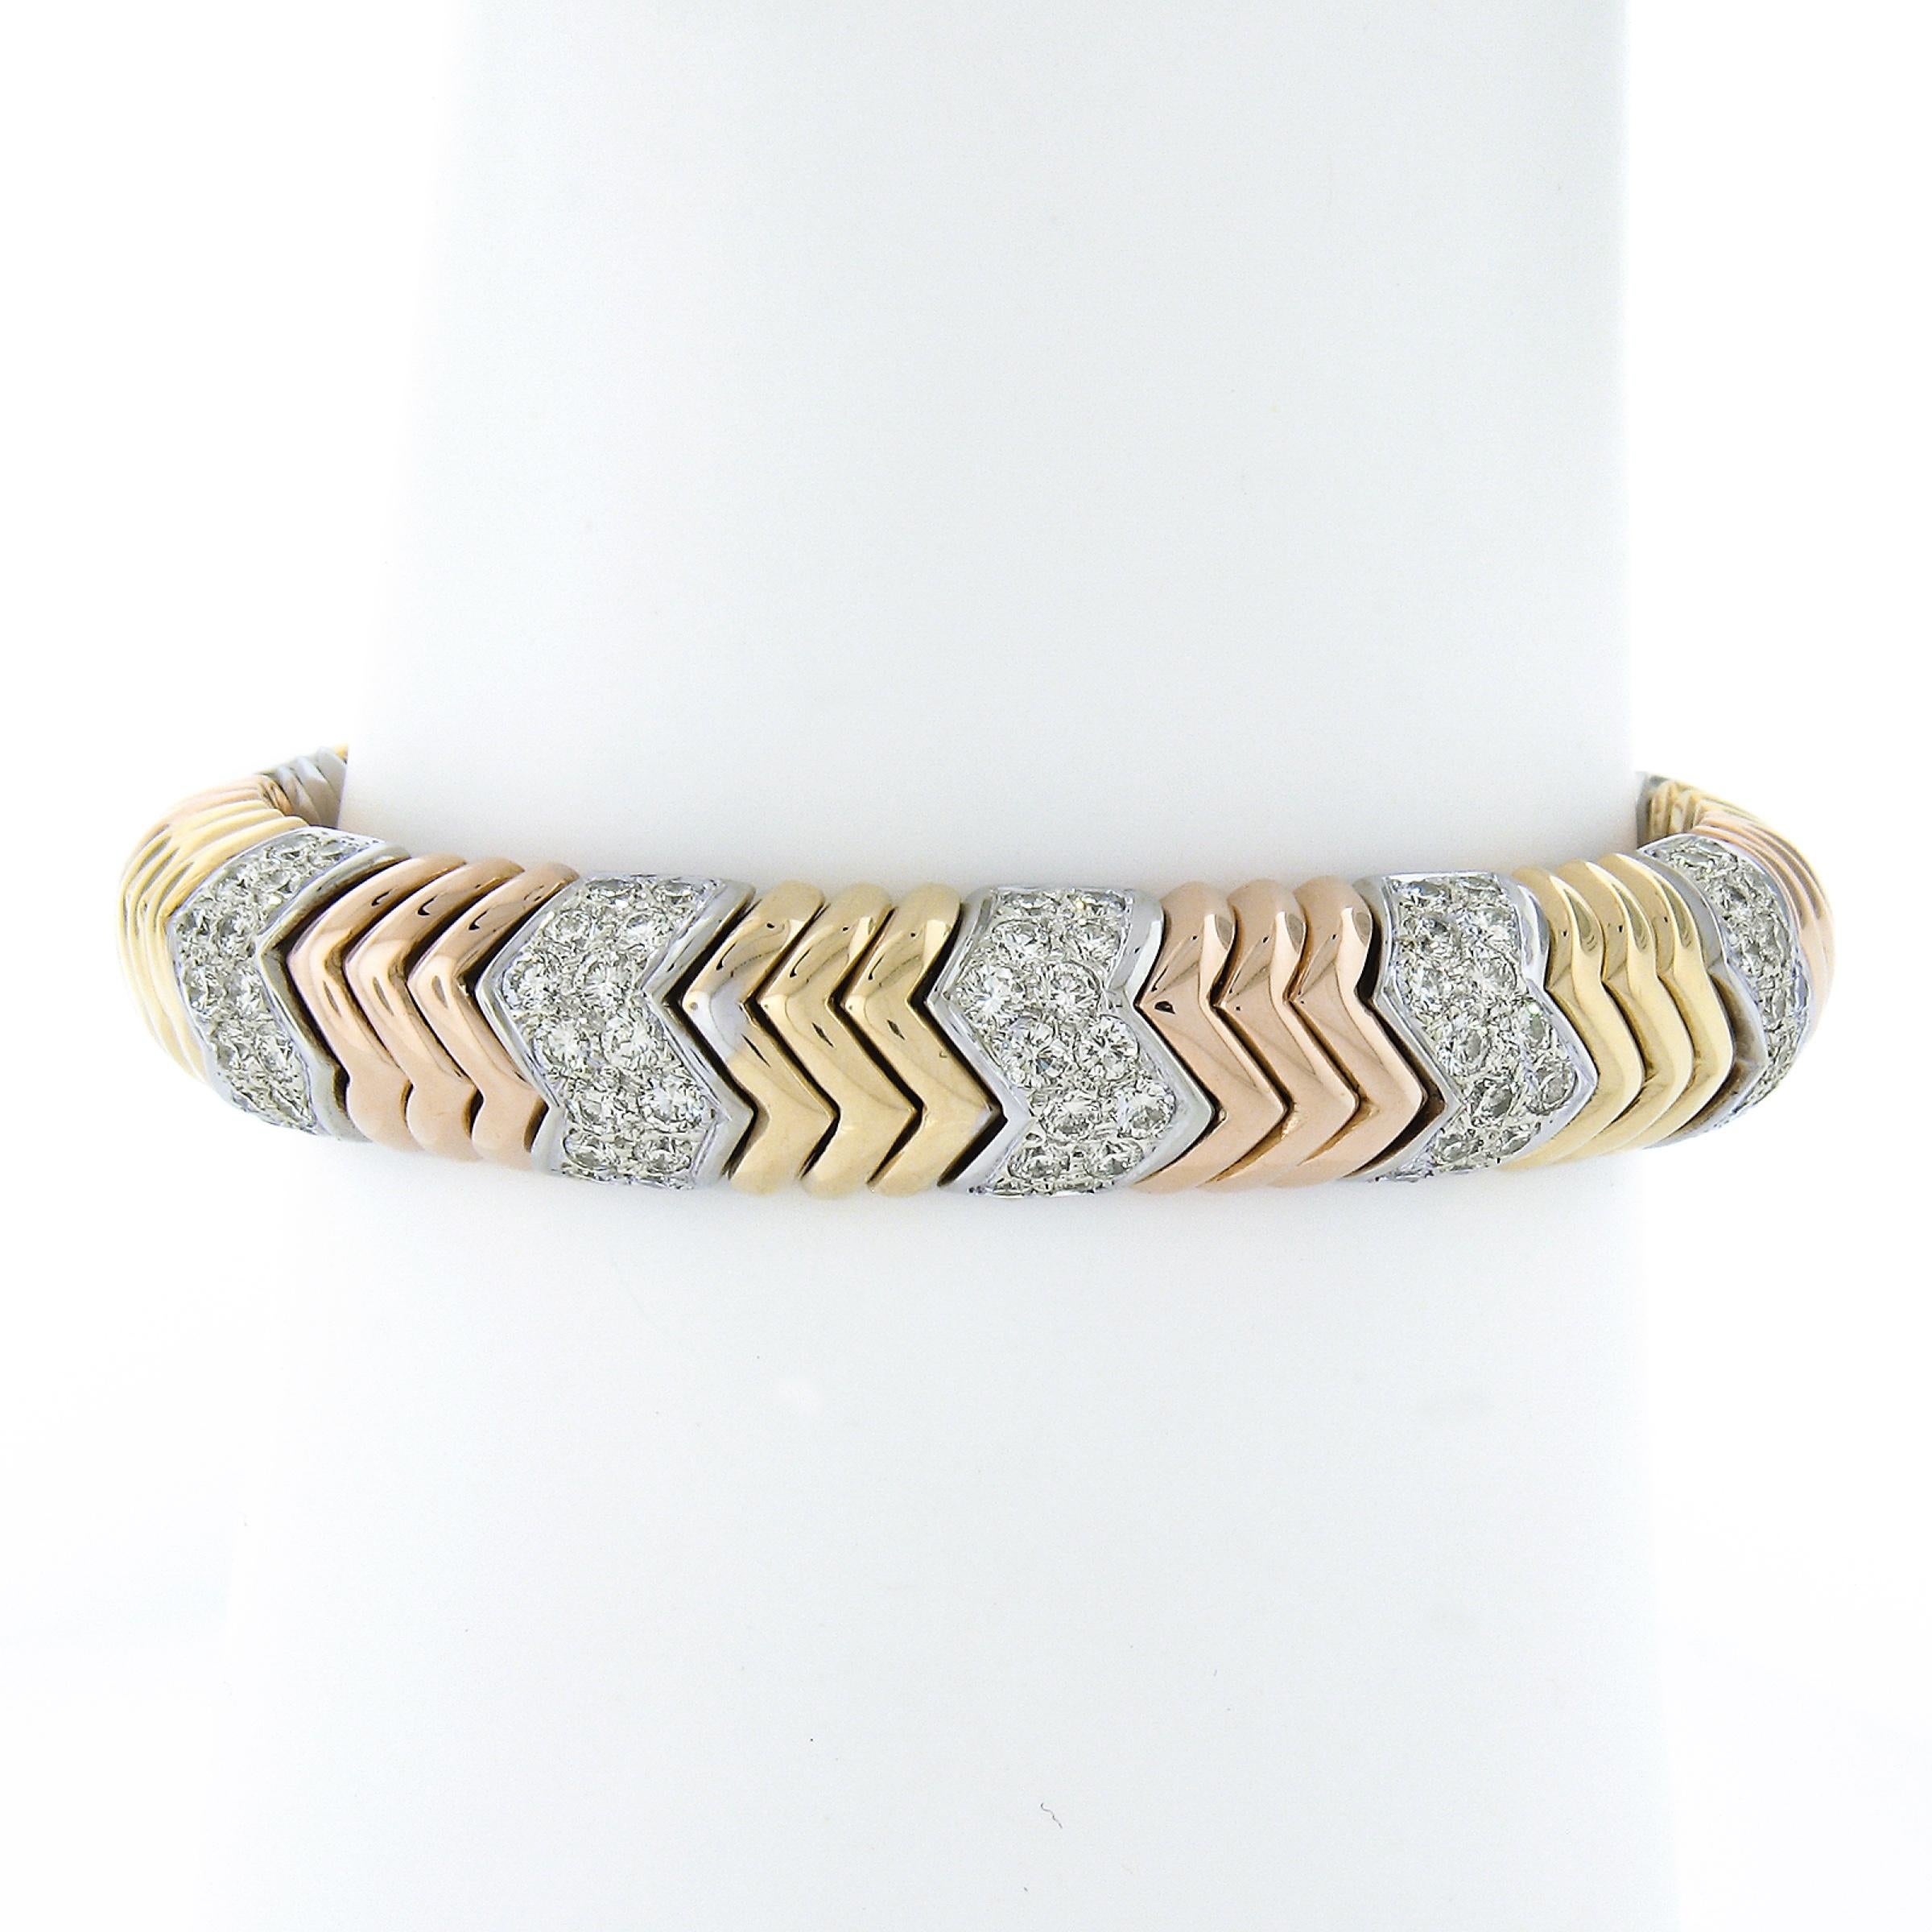 This stunner of a diamond cuff bracelet is assembled from solid 18k yellow, rose and white gold flexible chevron links. It is also adorned with chevron shaped pave set diamond links that add some fabulous bright and fiery effects with a total of